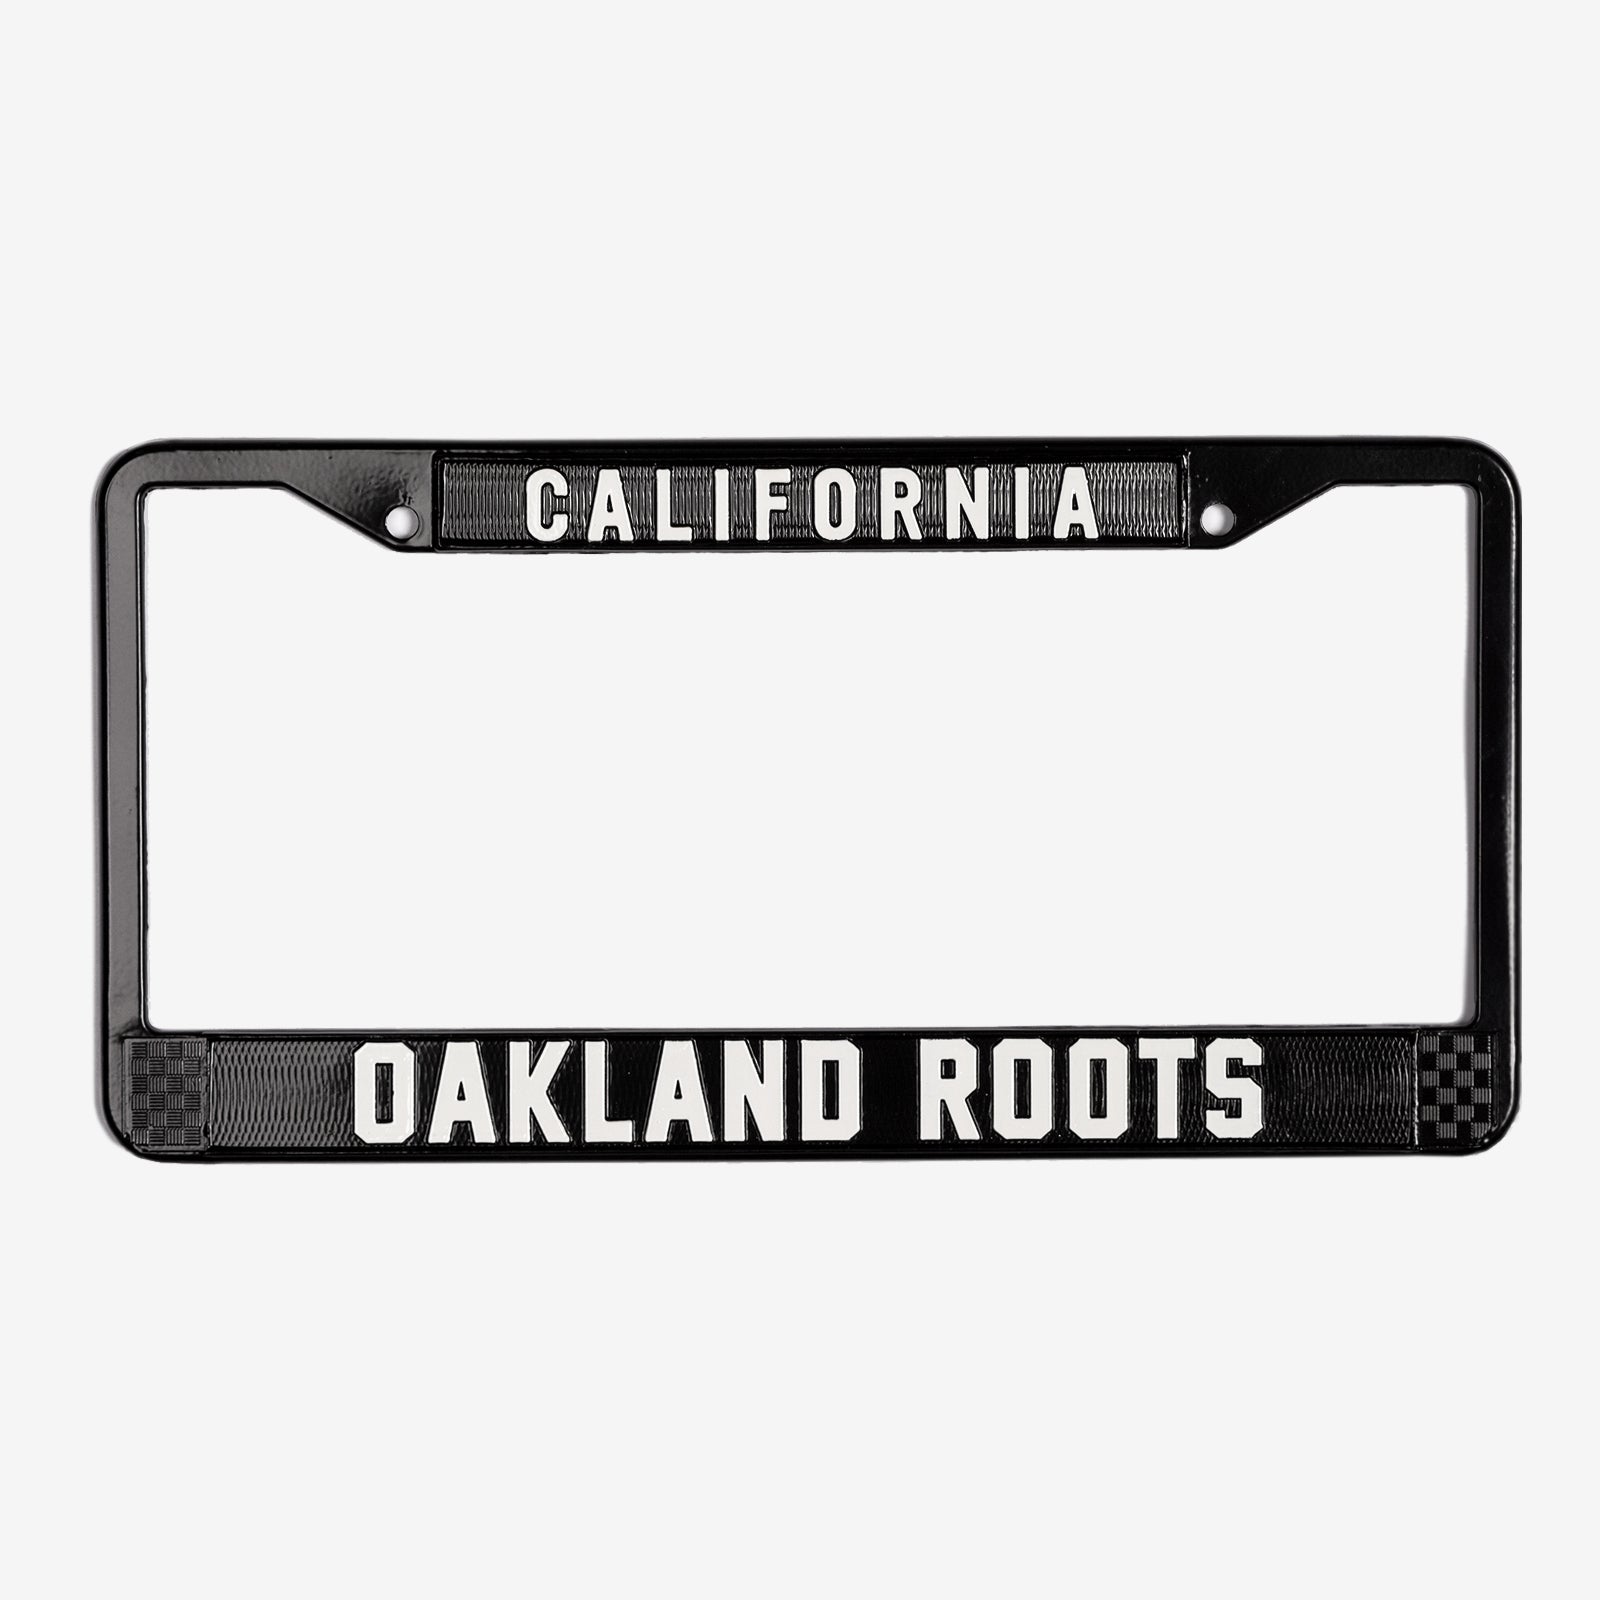 License plate holder with black rims with silver California wordmark on top and Oakland Roots logo on the bottom. 